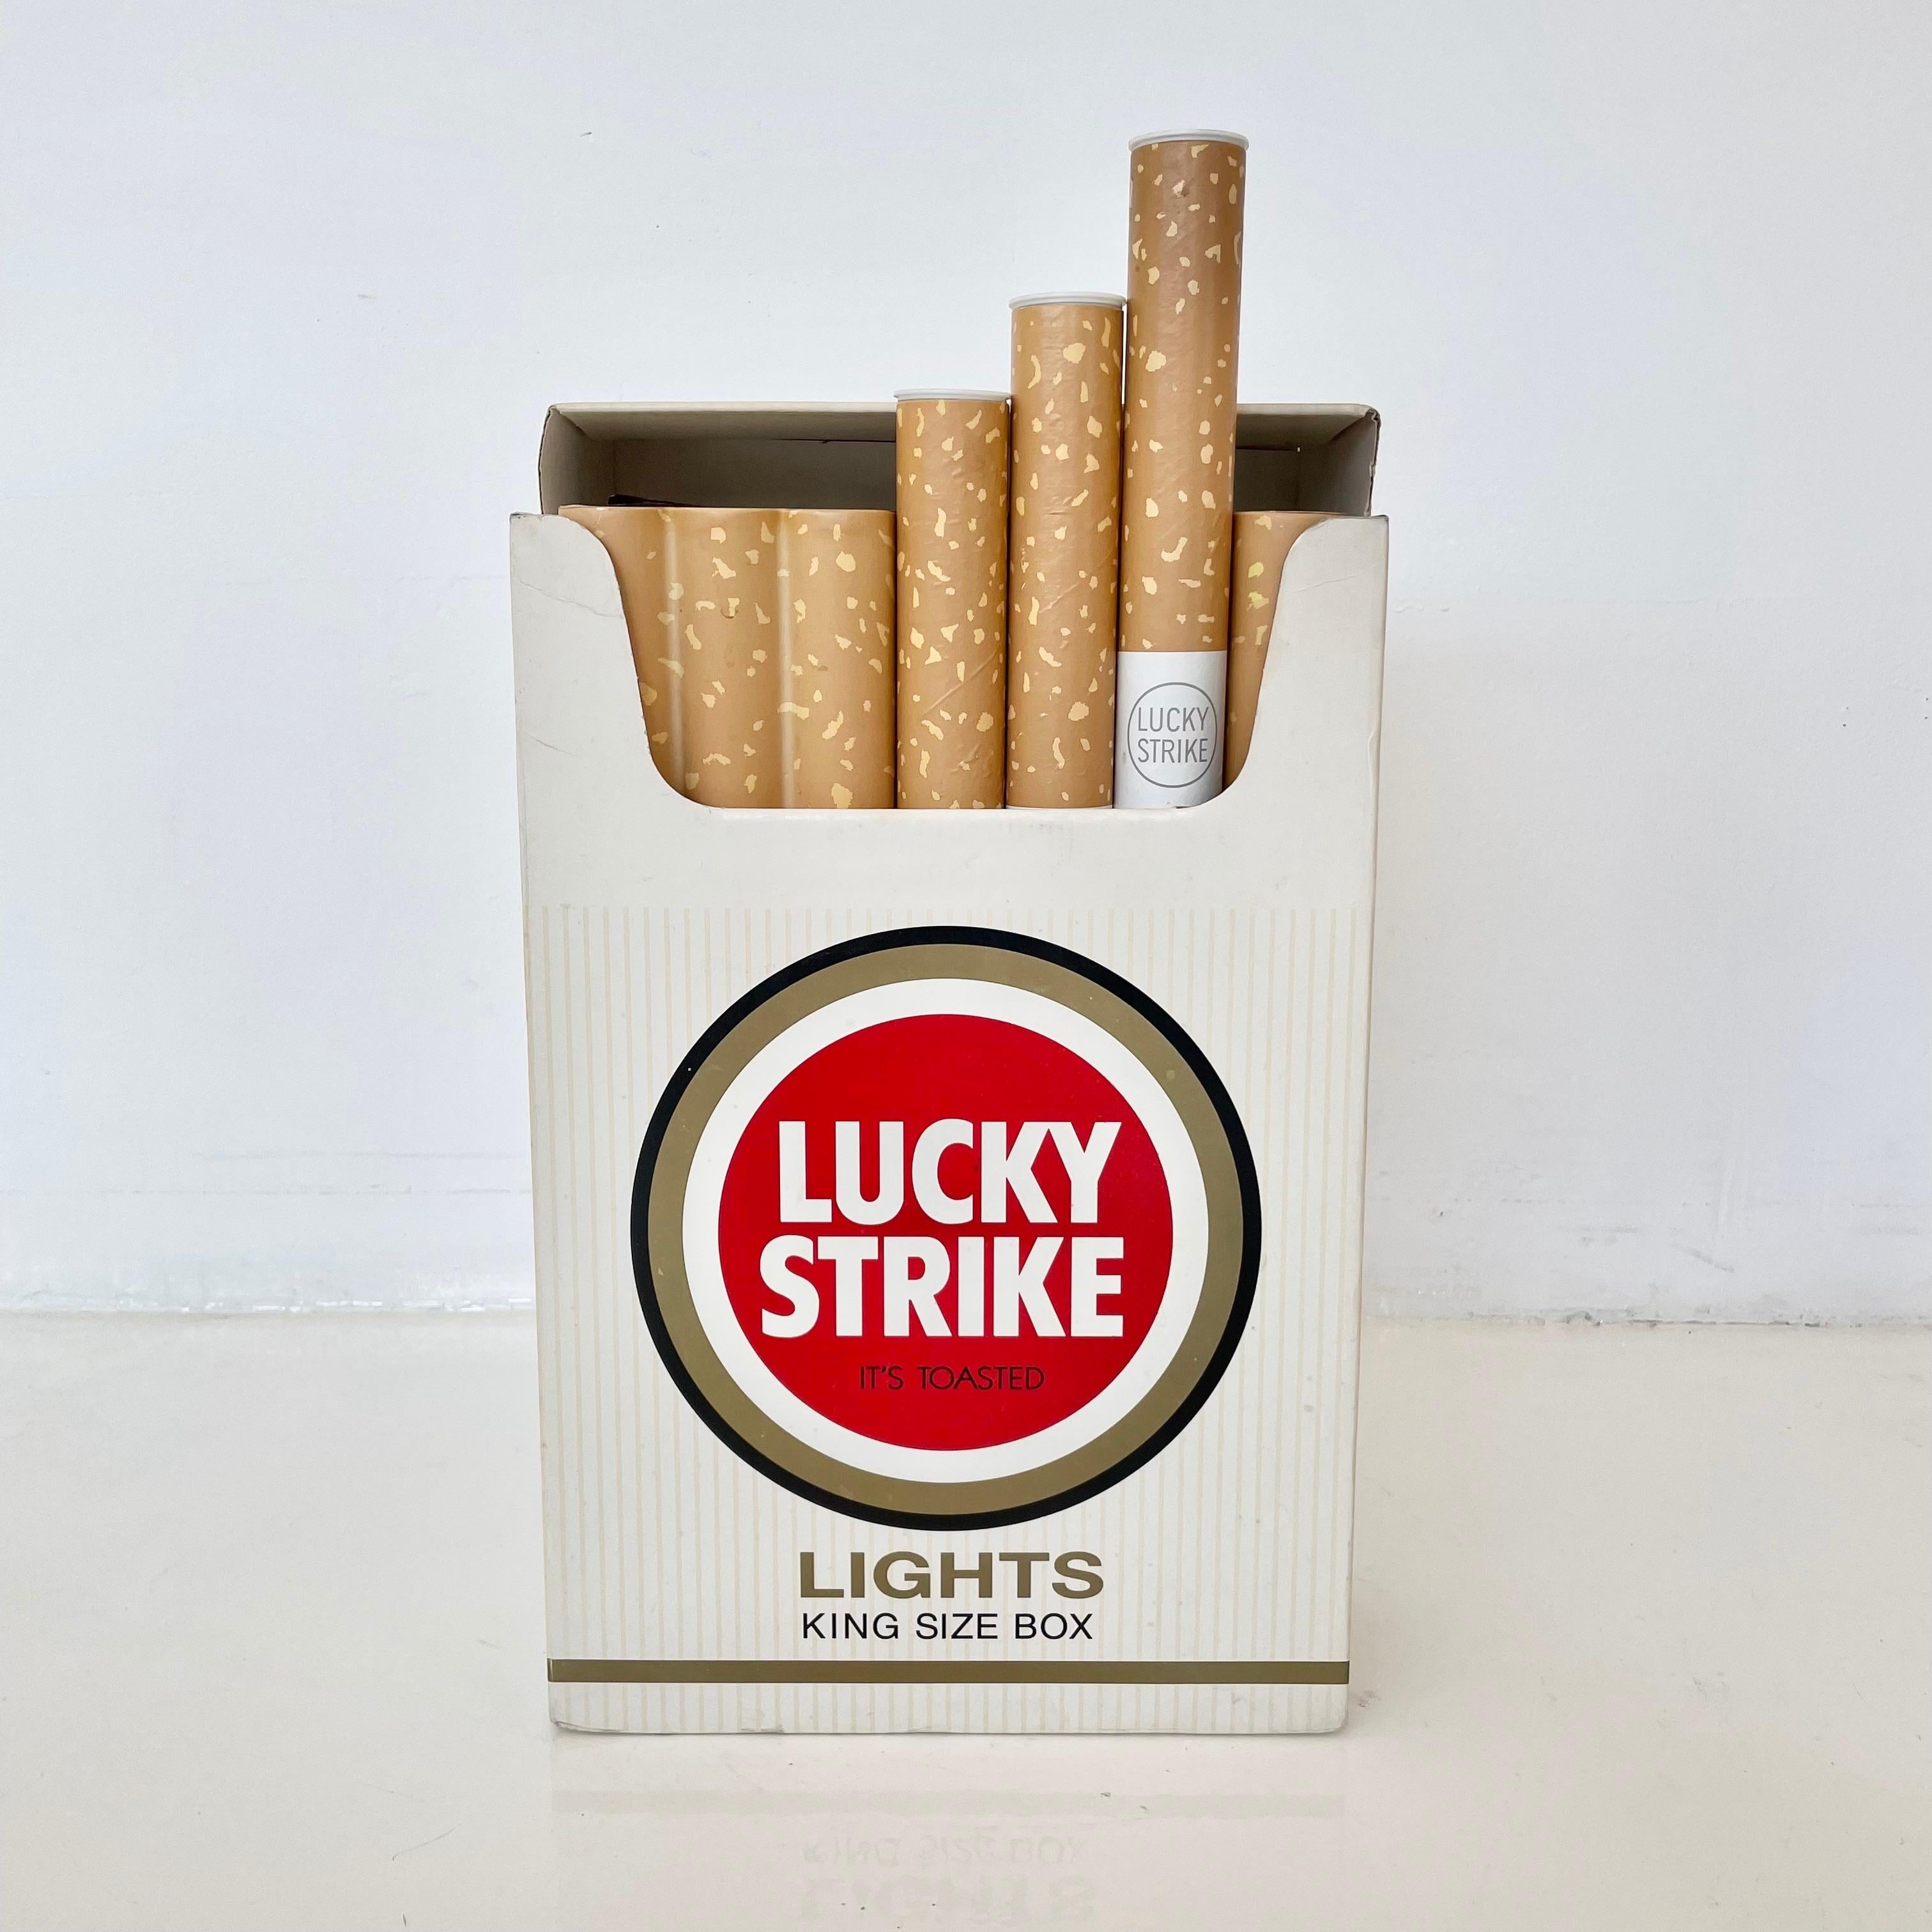 Cool oversized store display of Lucky Cigarettes. Cardboard Lucky Strike cigarette pack. Box opens. Three cigarettes pull out. Made of paper, plastic and cardboard. Fun piece of pop-art. Good condition with some wear.